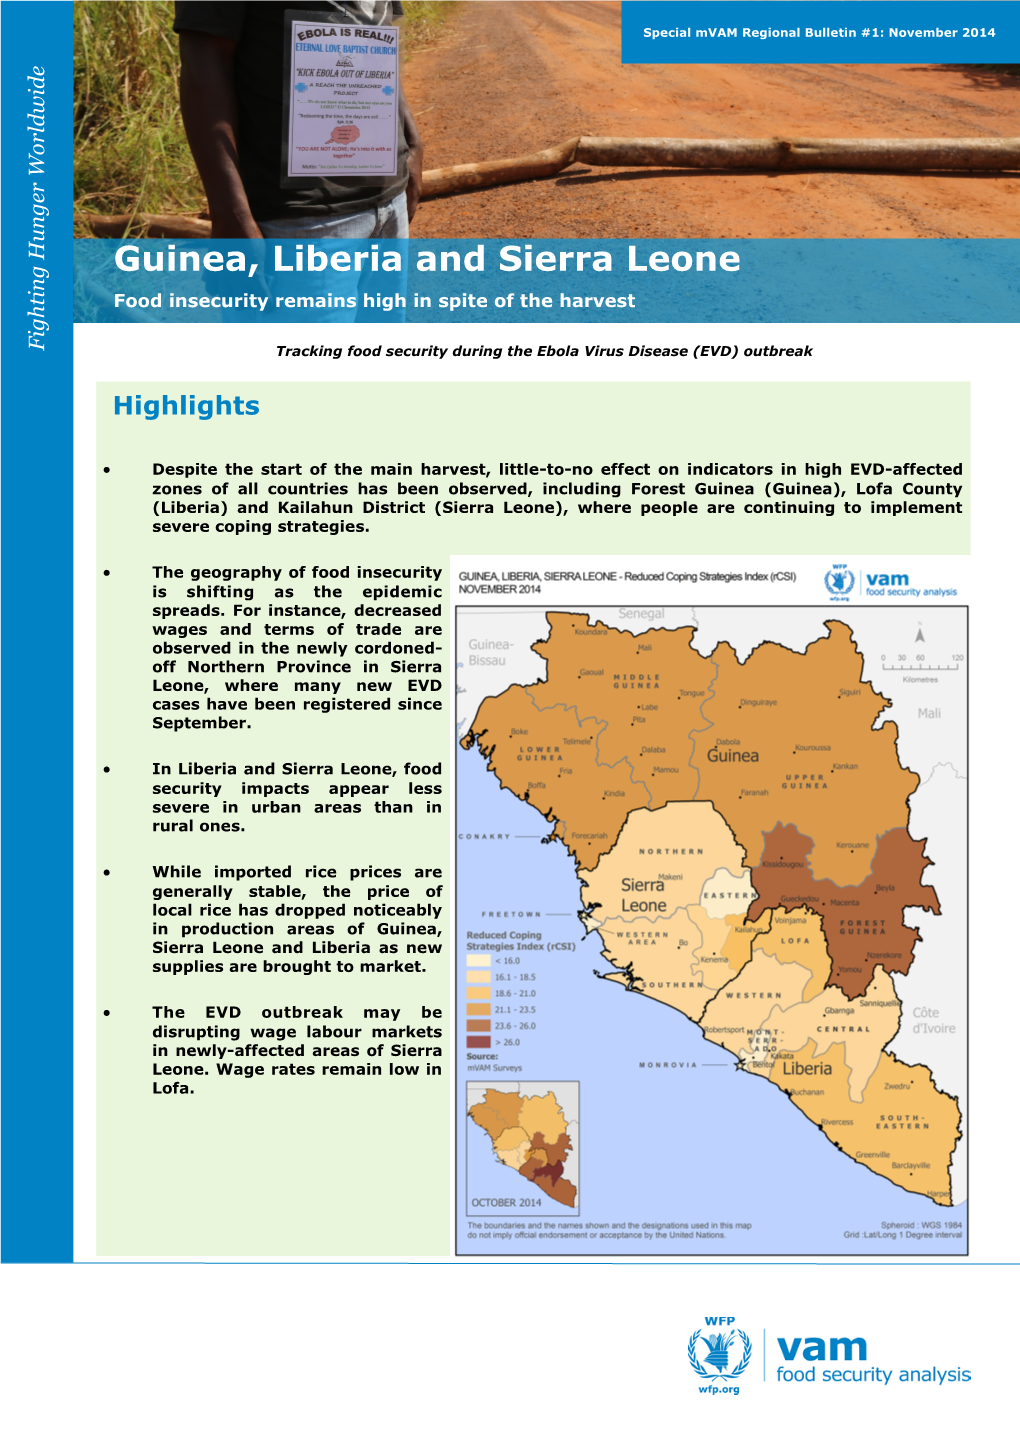 Guinea, Liberia and Sierra Leone Food Insecurity Remains High in Spite of the Harvest